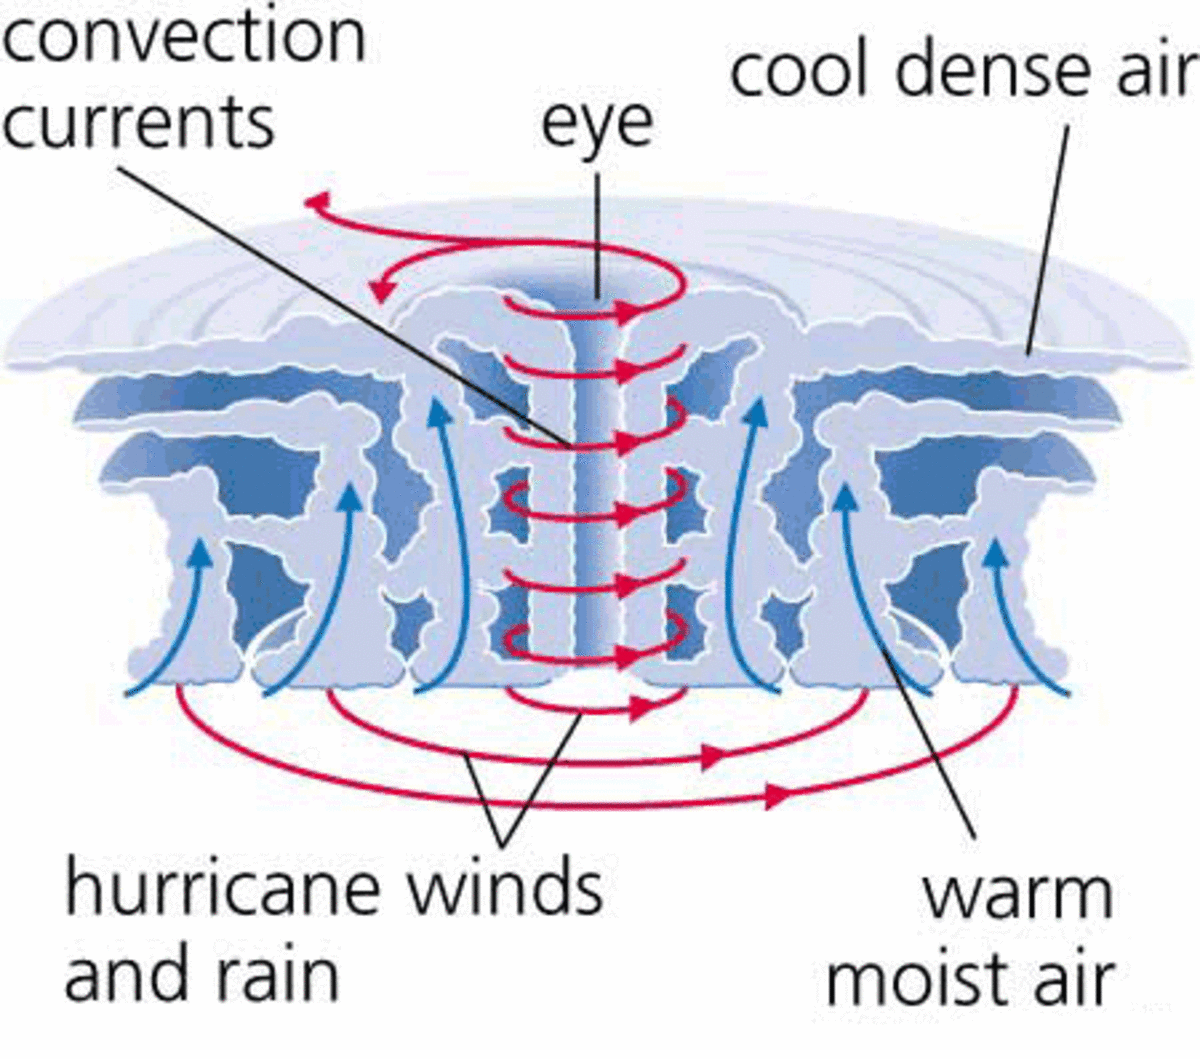 This simplified diagram shows the anatomy of a hurricane.